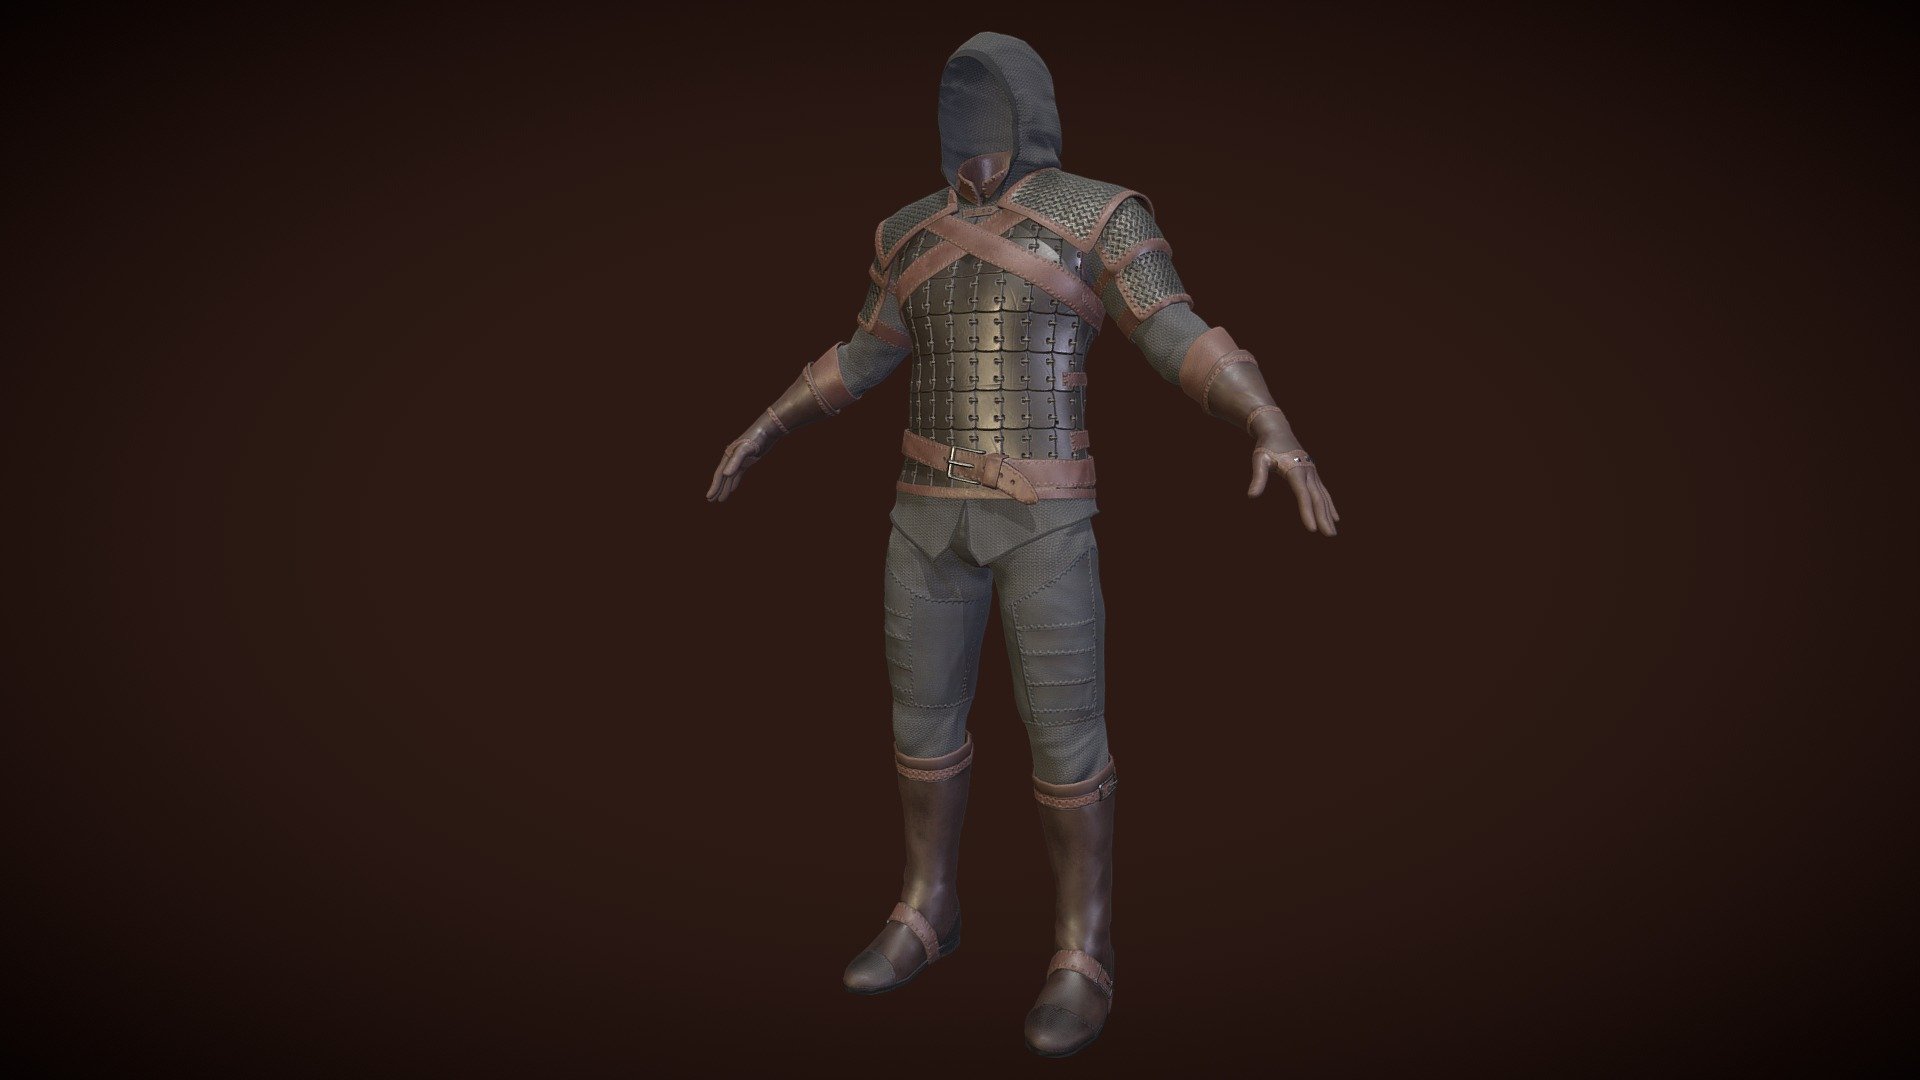 The Adventurer Leather Armor

Inspired by The Witcher (Geralt)

This armor is not rigged.

I have included an FBX file along with the dae file from Substance Painter.

Please make sure to inspect the model thoroughly before making your purchase.

If there are any issues please message me before leaving bad feedback.

I can be contacted through sketchfab and also email and my facebook page.

Email: azazel_d2@hotmail.com

Facebook: https://www.facebook.com/ReaperProductions - The Adventurer Leather - Fantasy Style Armor - Buy Royalty Free 3D model by Slayerazazel (@azazeld2) 3d model